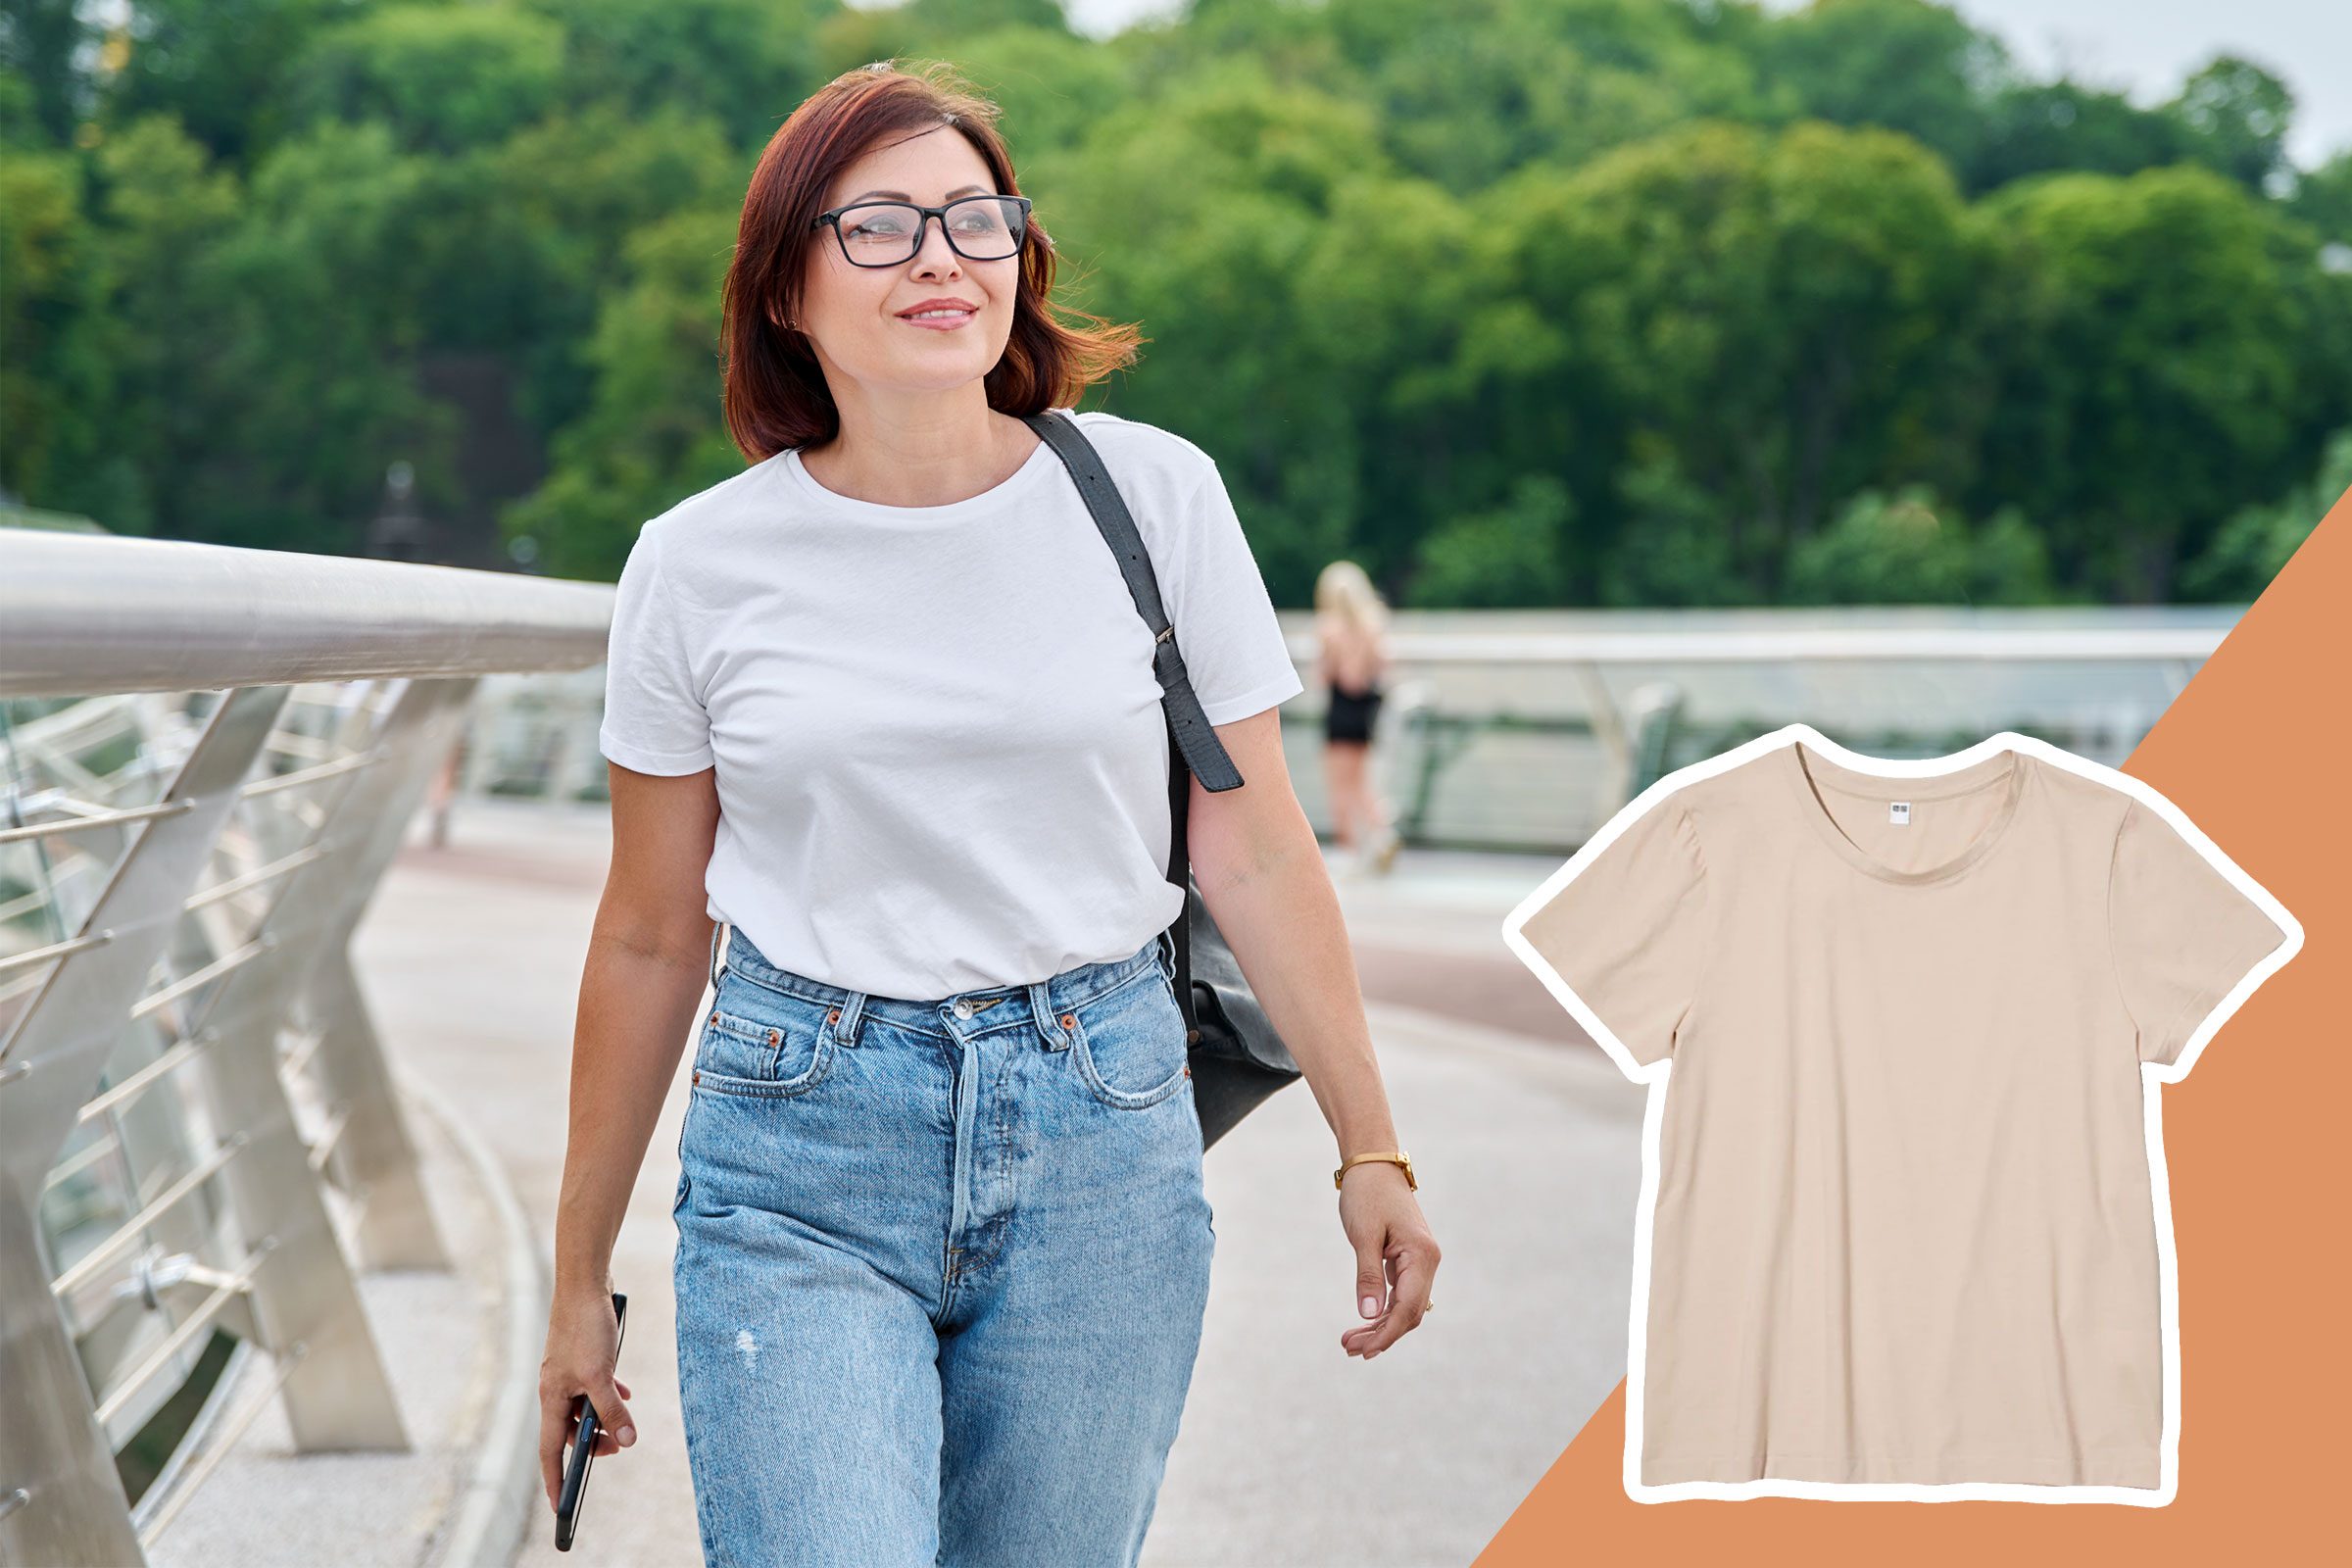 woman in a white t-shirt and jeans walking down the street